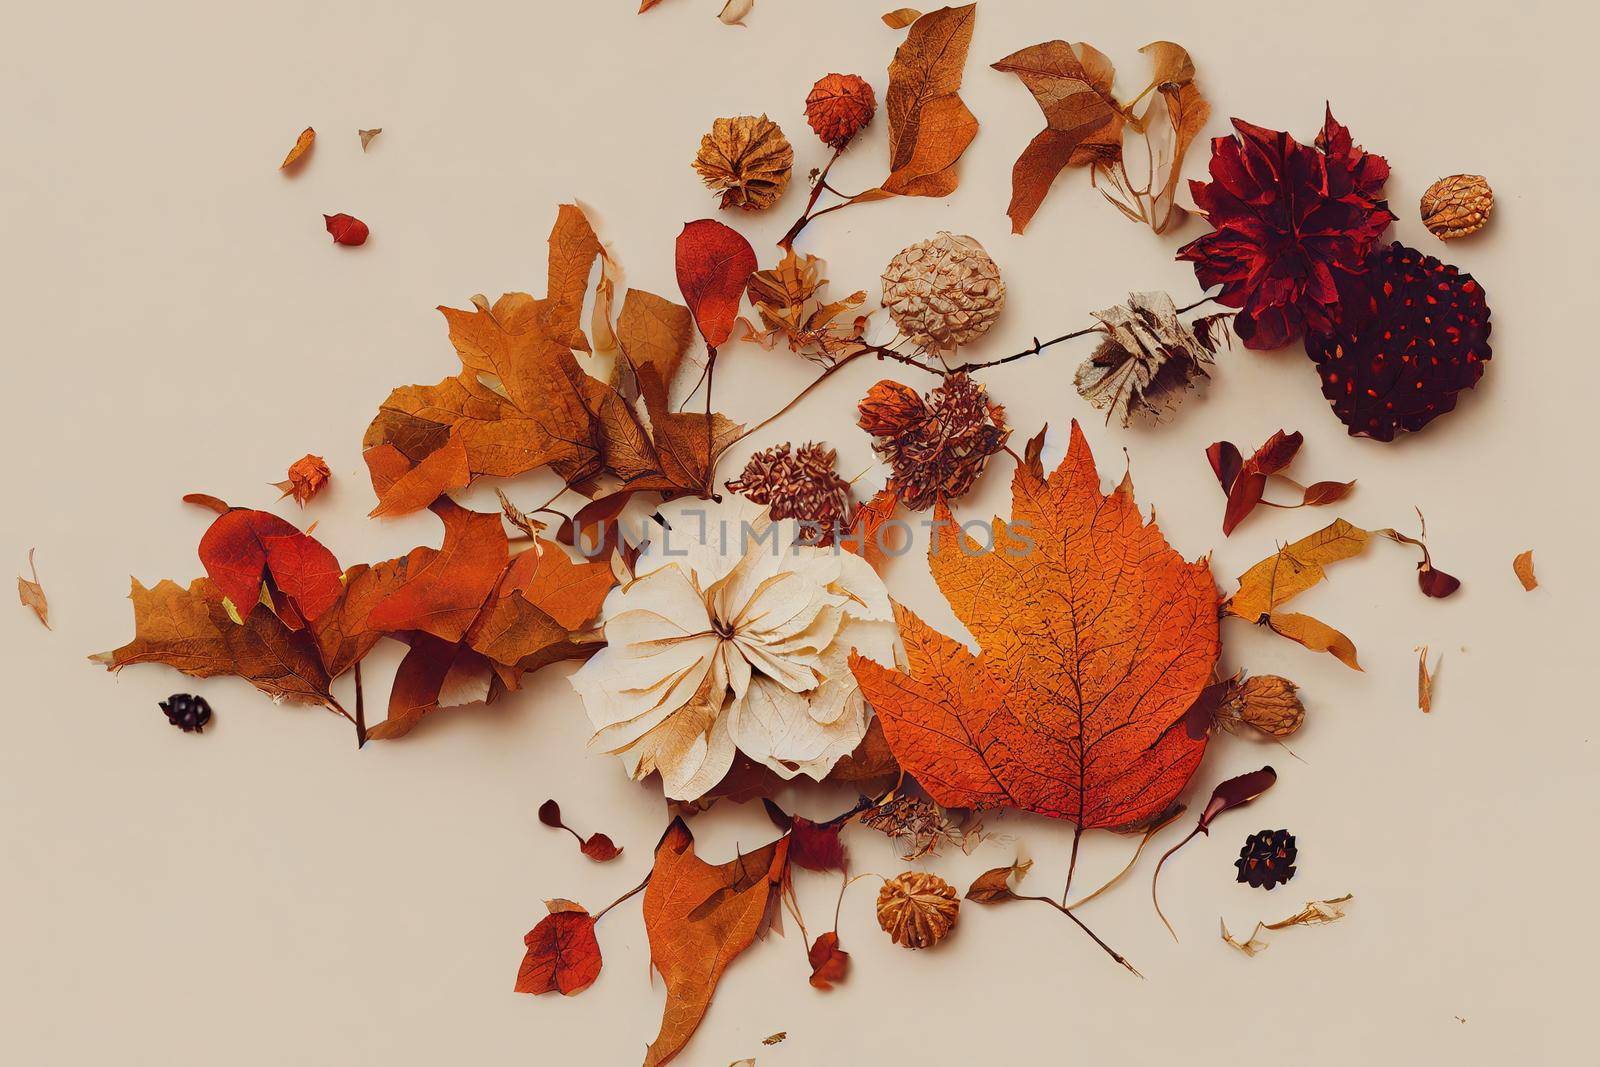 Autumn composition Pattern made of dried leaves, flowers, berries on white background Autumn, fall, thanksgiving day concept Flat lay, top view , anime style